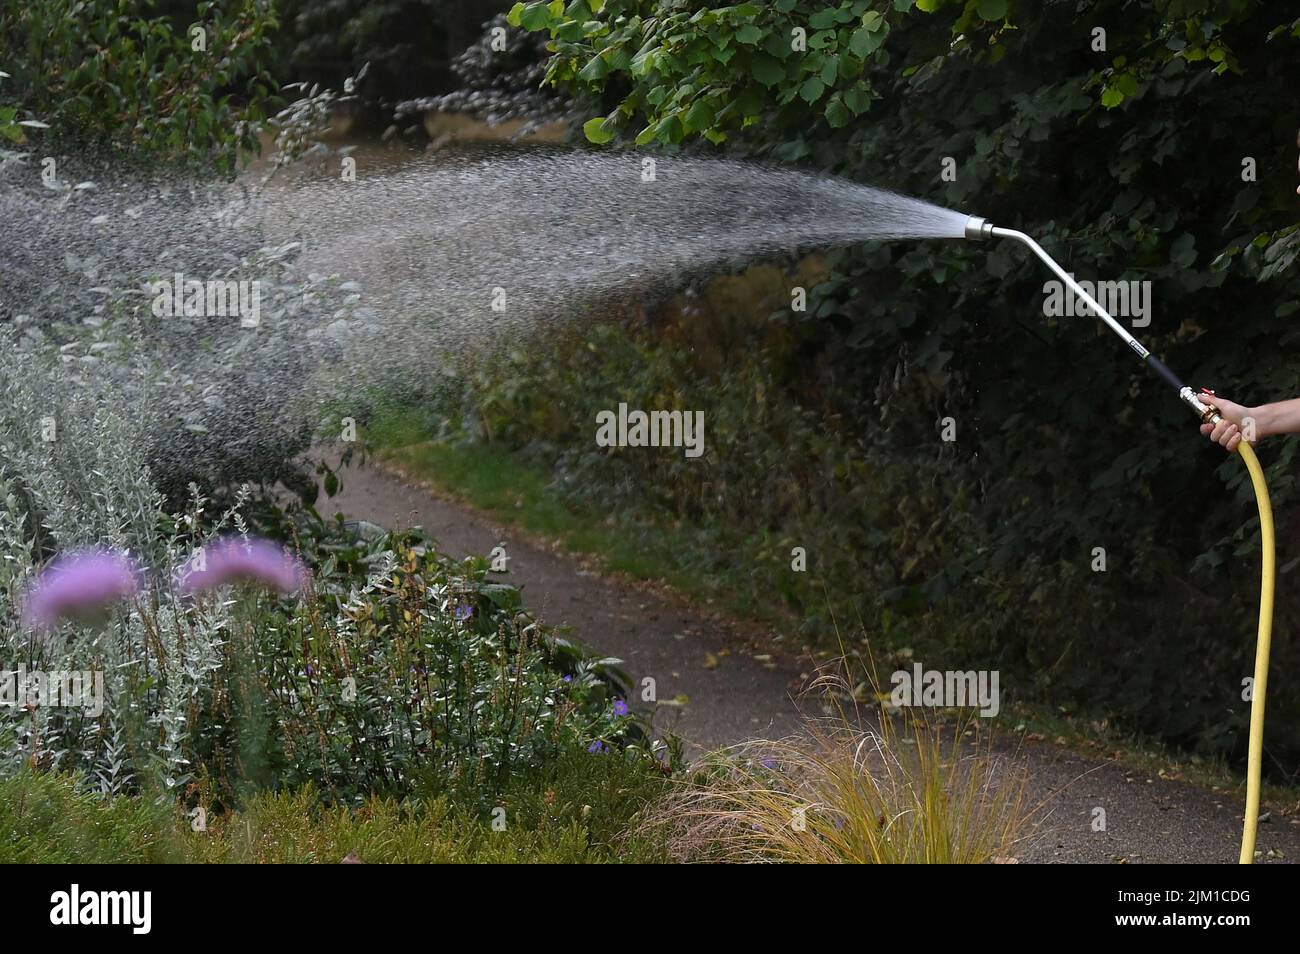 A worker waters plants in a public park, ahead of regional restrictions for private and residential water usage being implemented, in London, Britain, August 4, 2022. REUTERS/Toby Melville Stock Photo